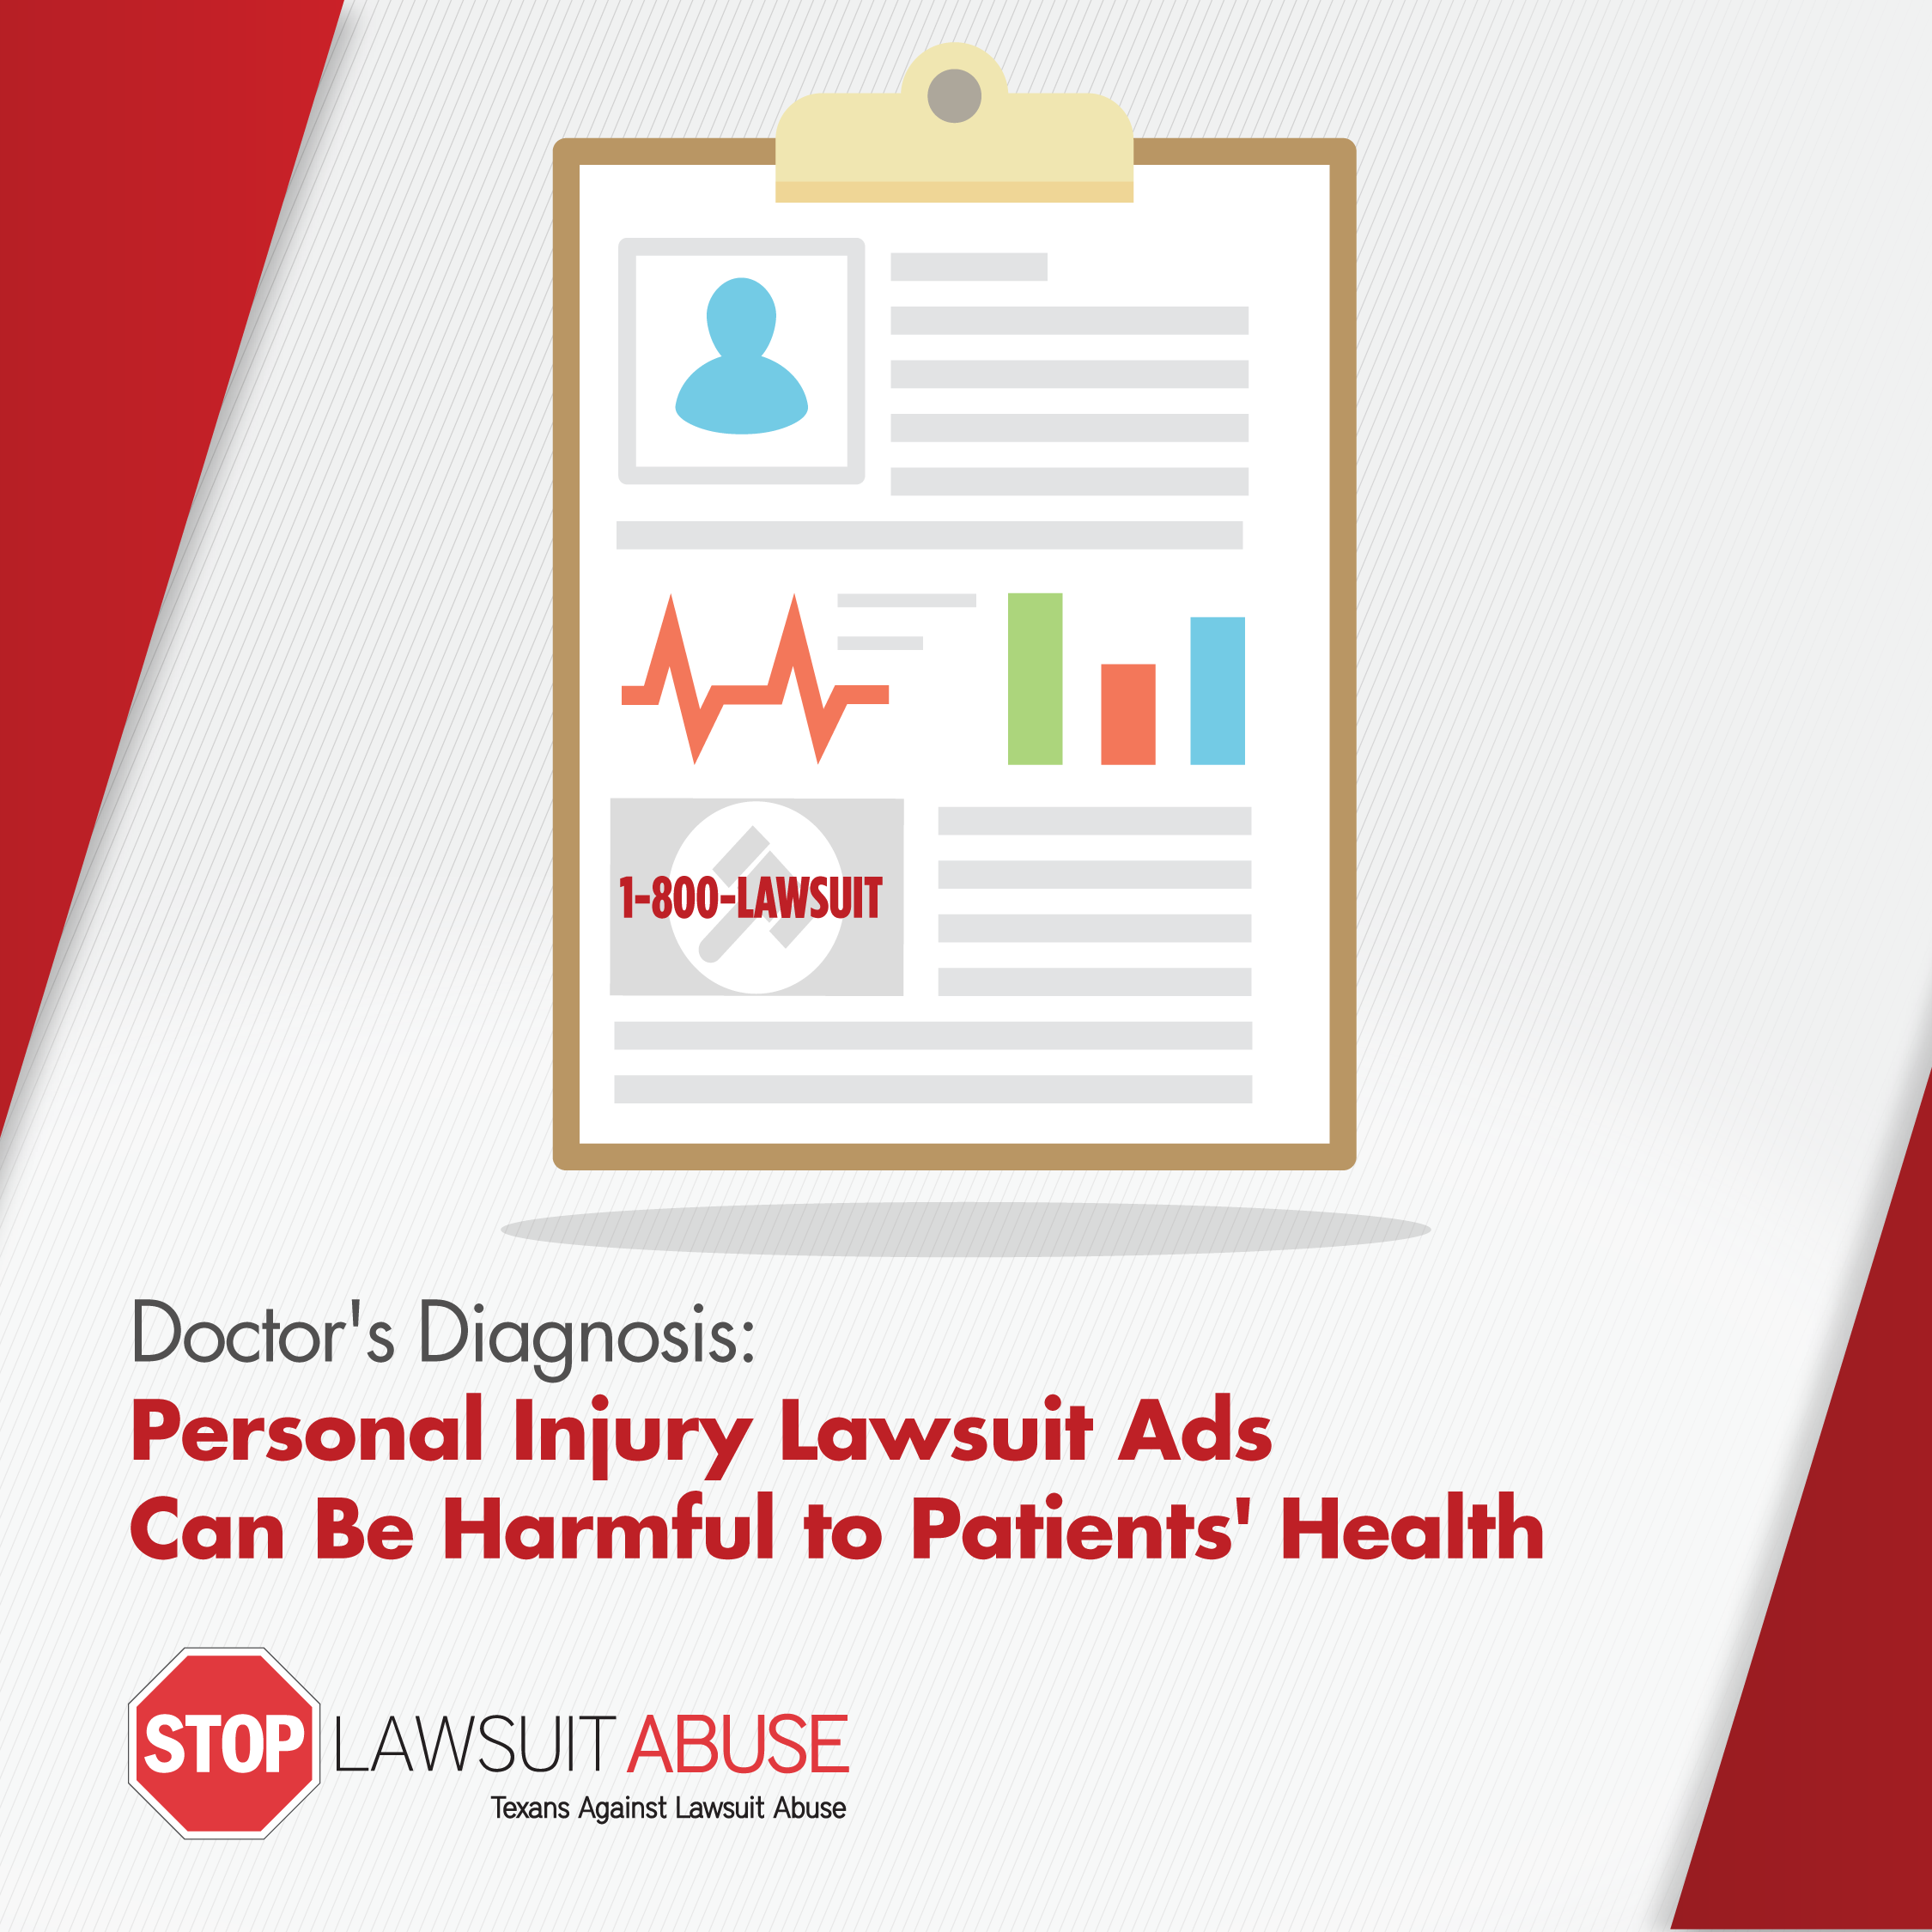 Doctors’ Diagnosis: Personal Injury Lawsuit Ads Can Be Harmful to Patients’ Health